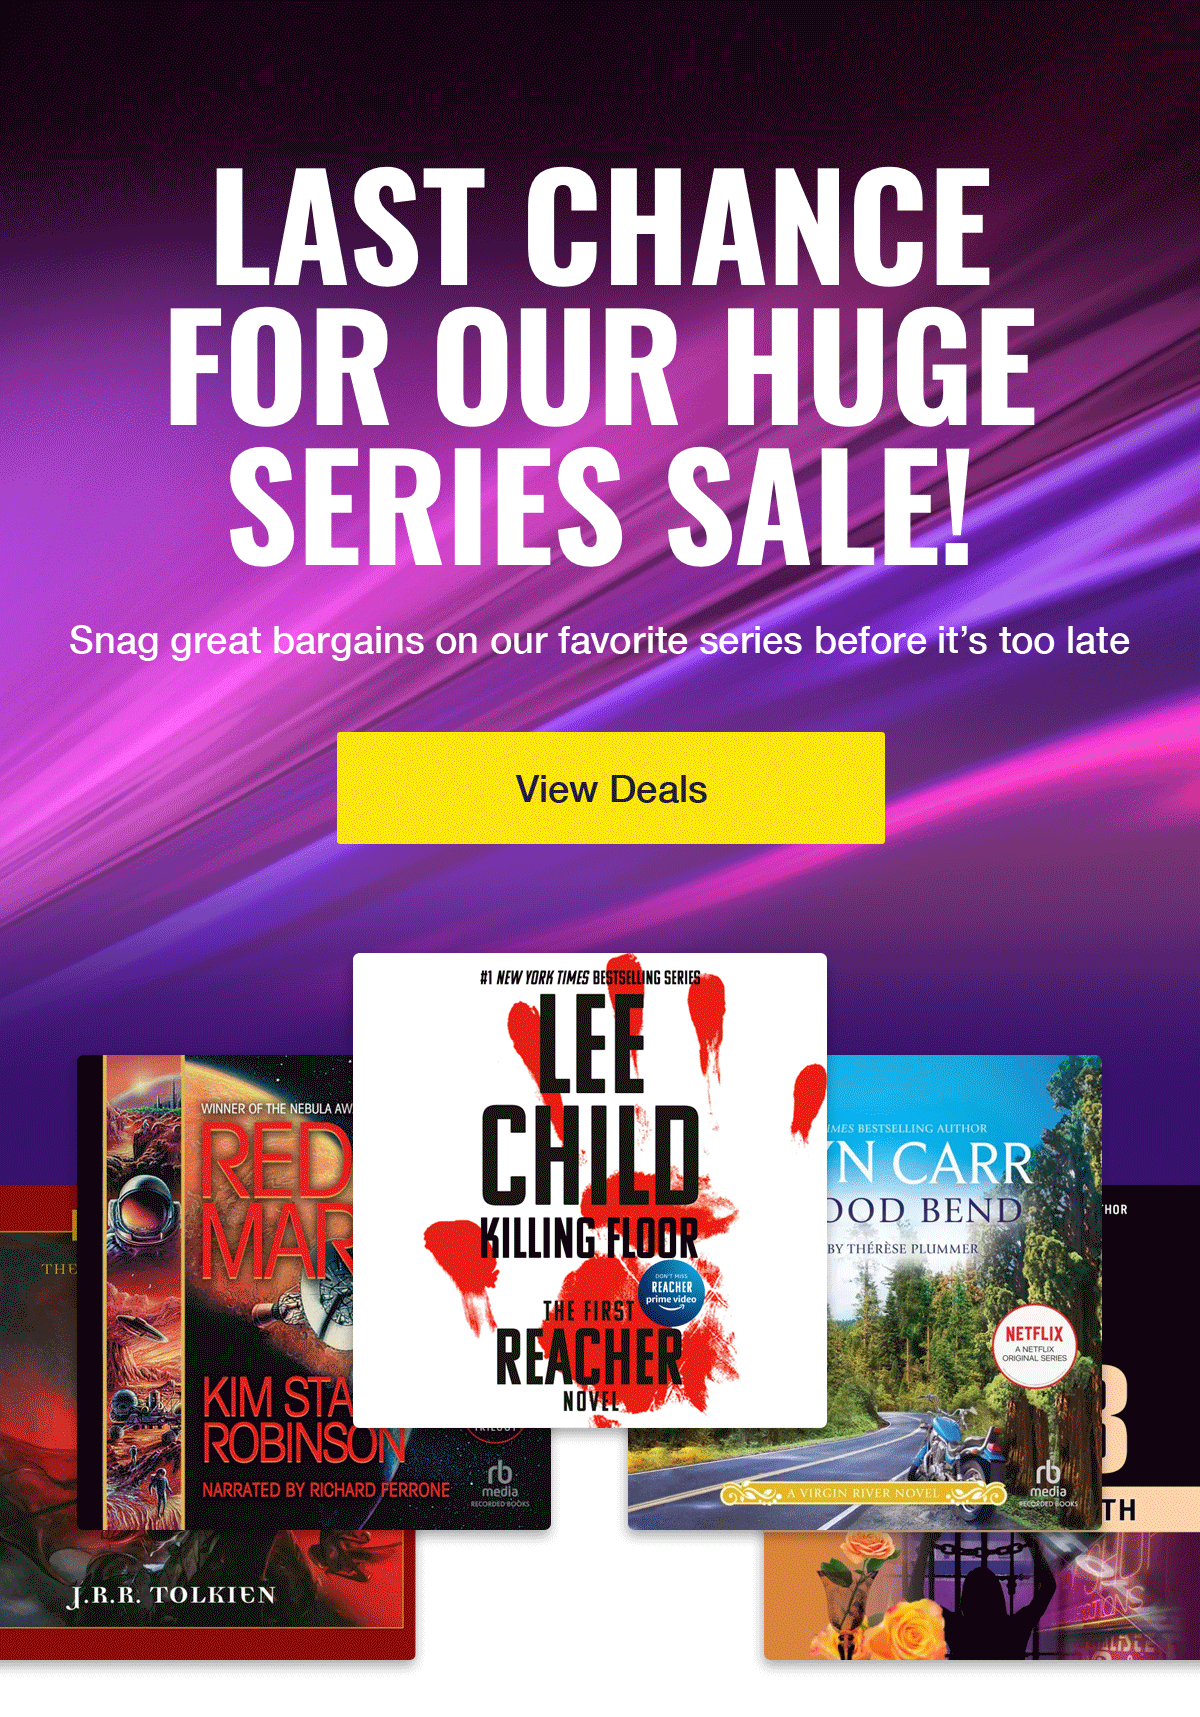 Snag great bargains on our favorite series before it's too late